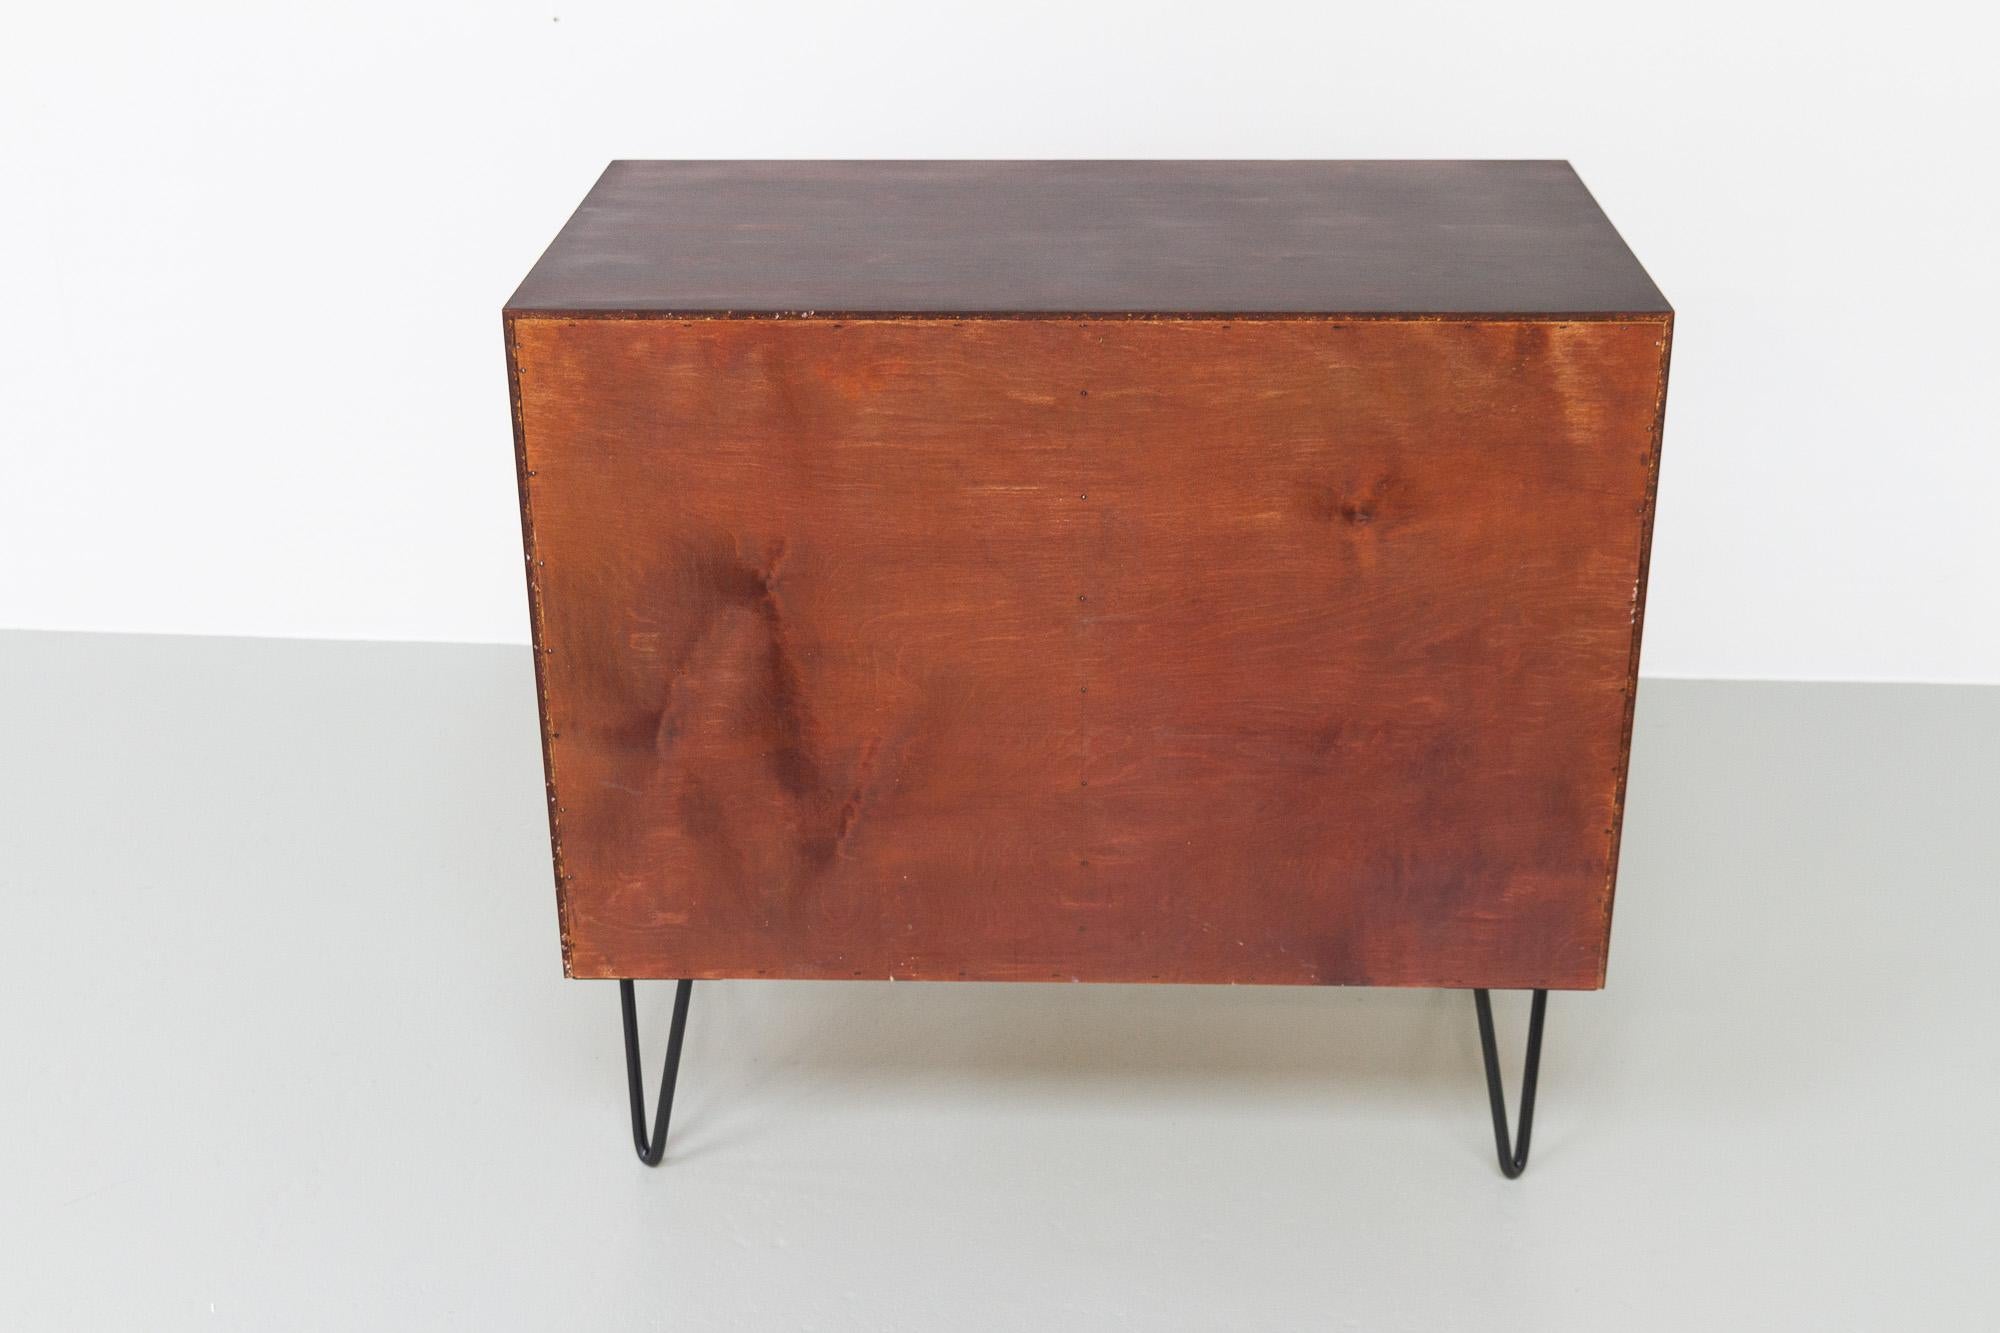 Vintage Danish Rosewood Chest of Drawers by Hg Furniture, 1960s For Sale 6